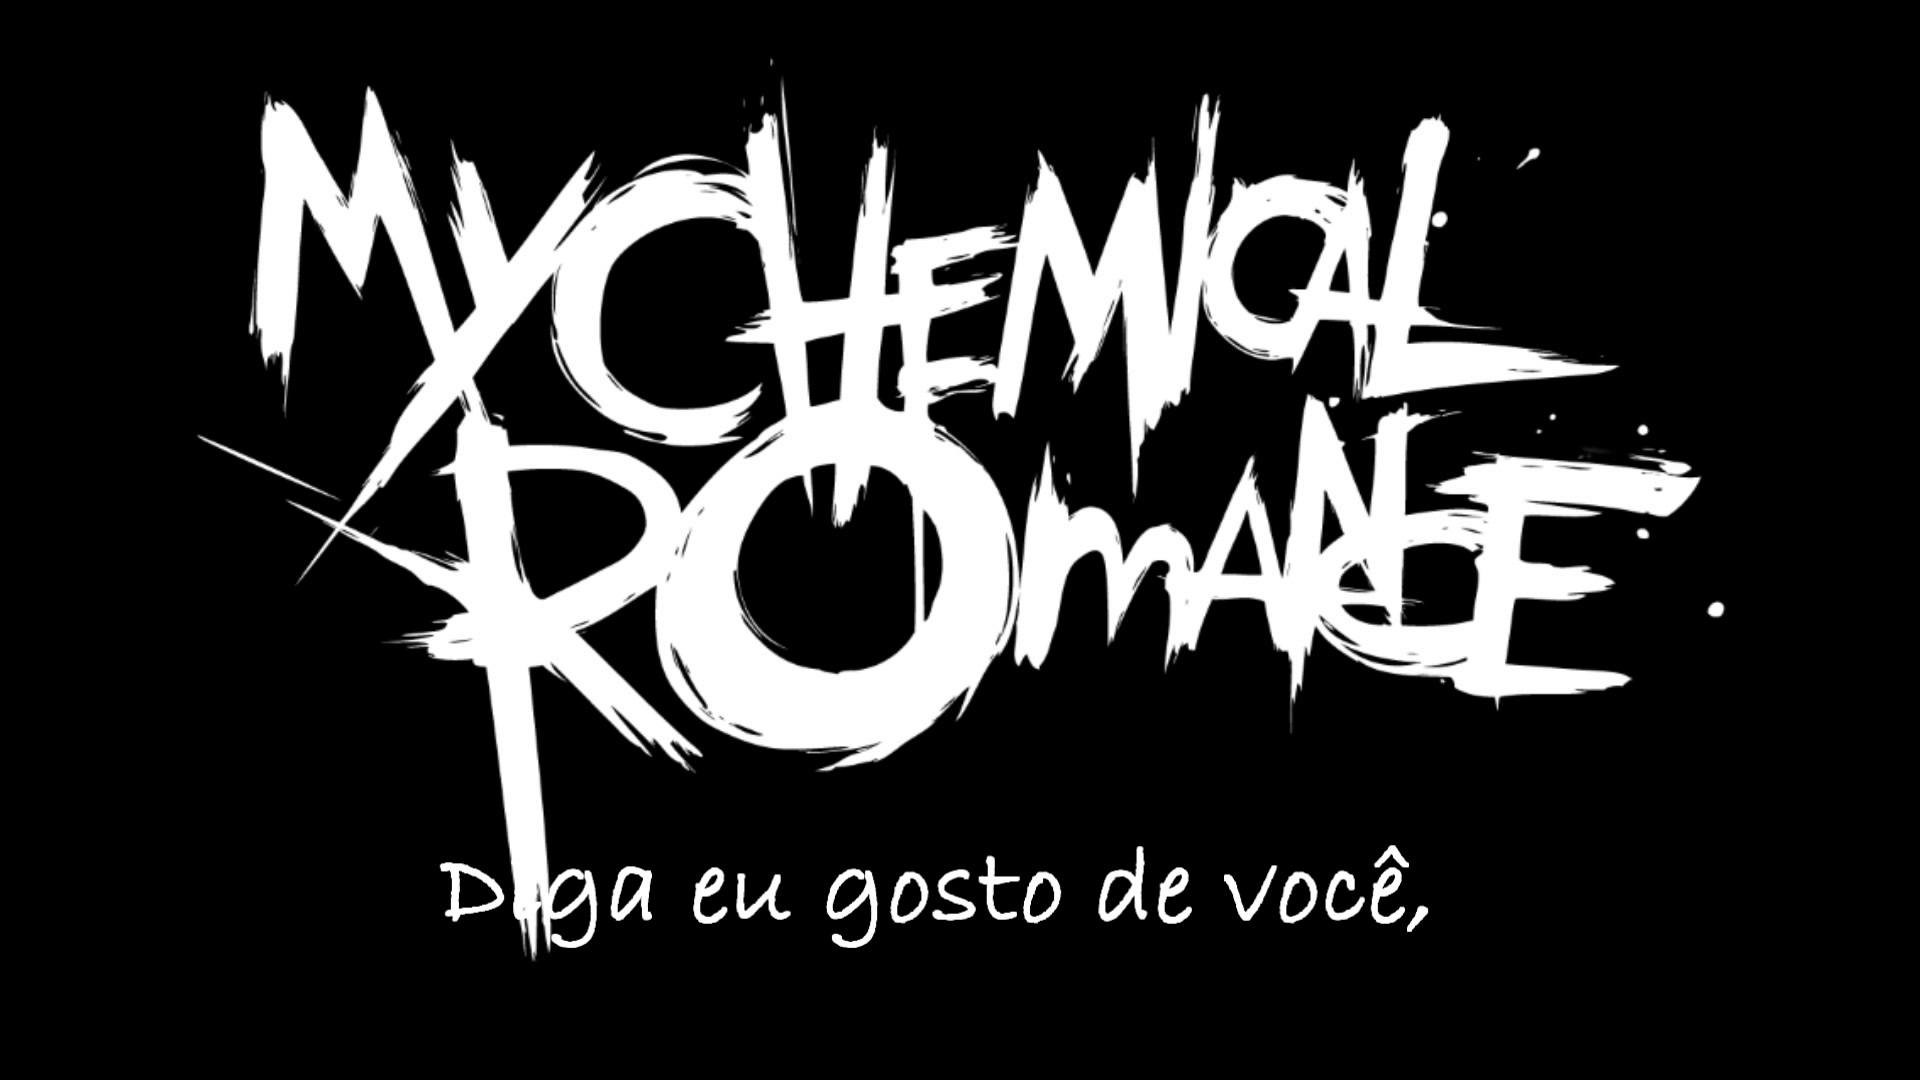 My Chemical Romance Wallpaper HD (69+ images)1920 x 1080